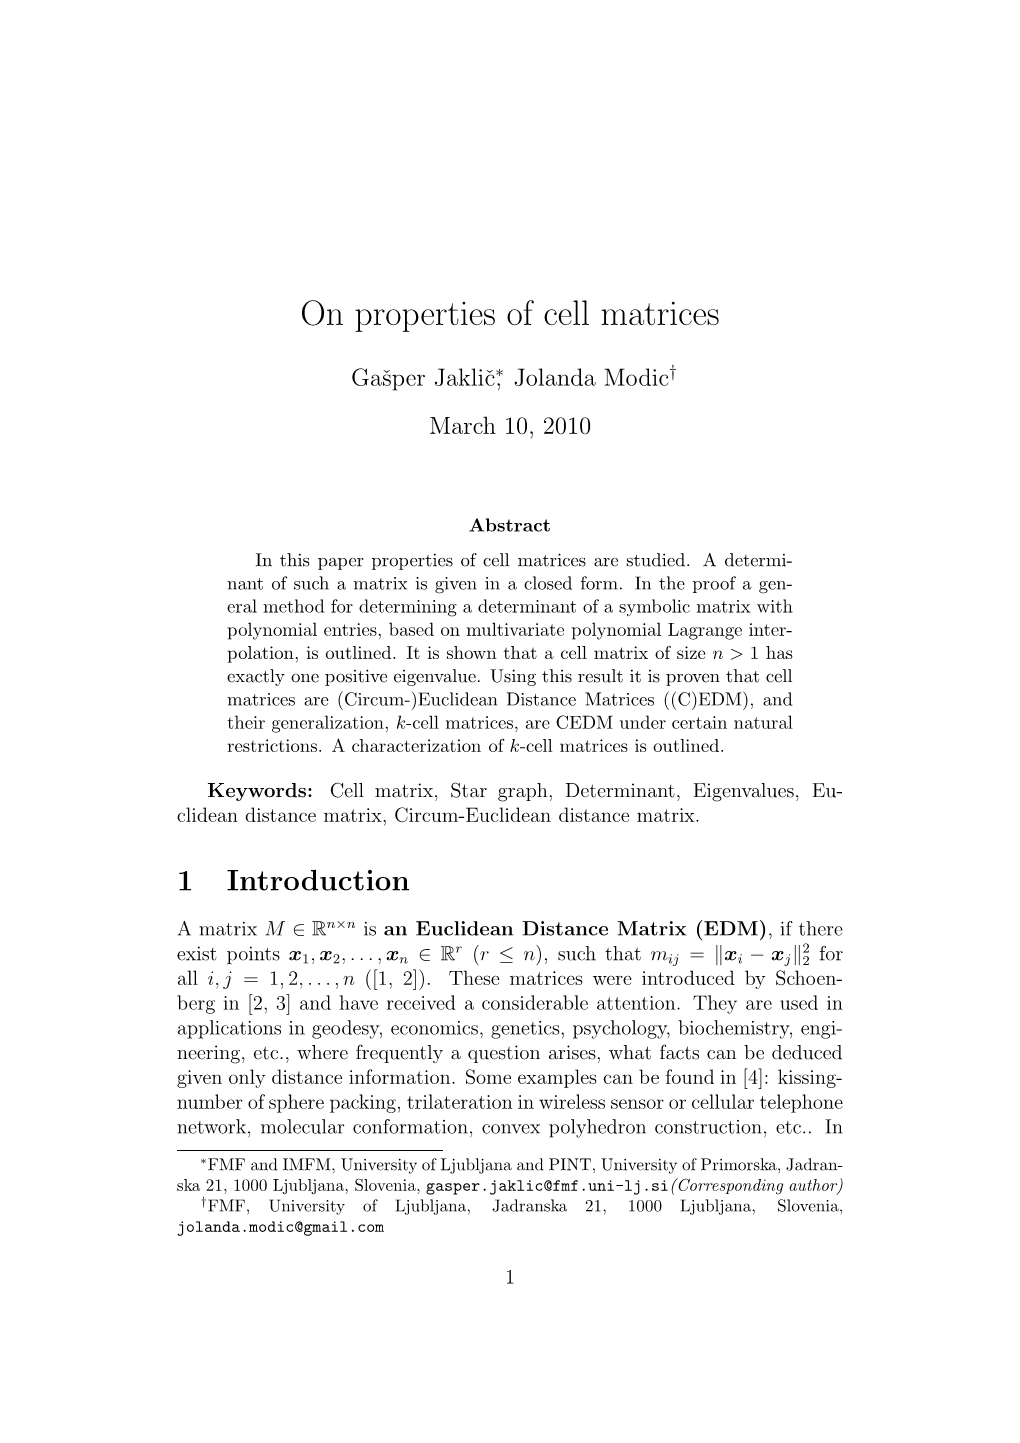 On Properties of Cell Matrices